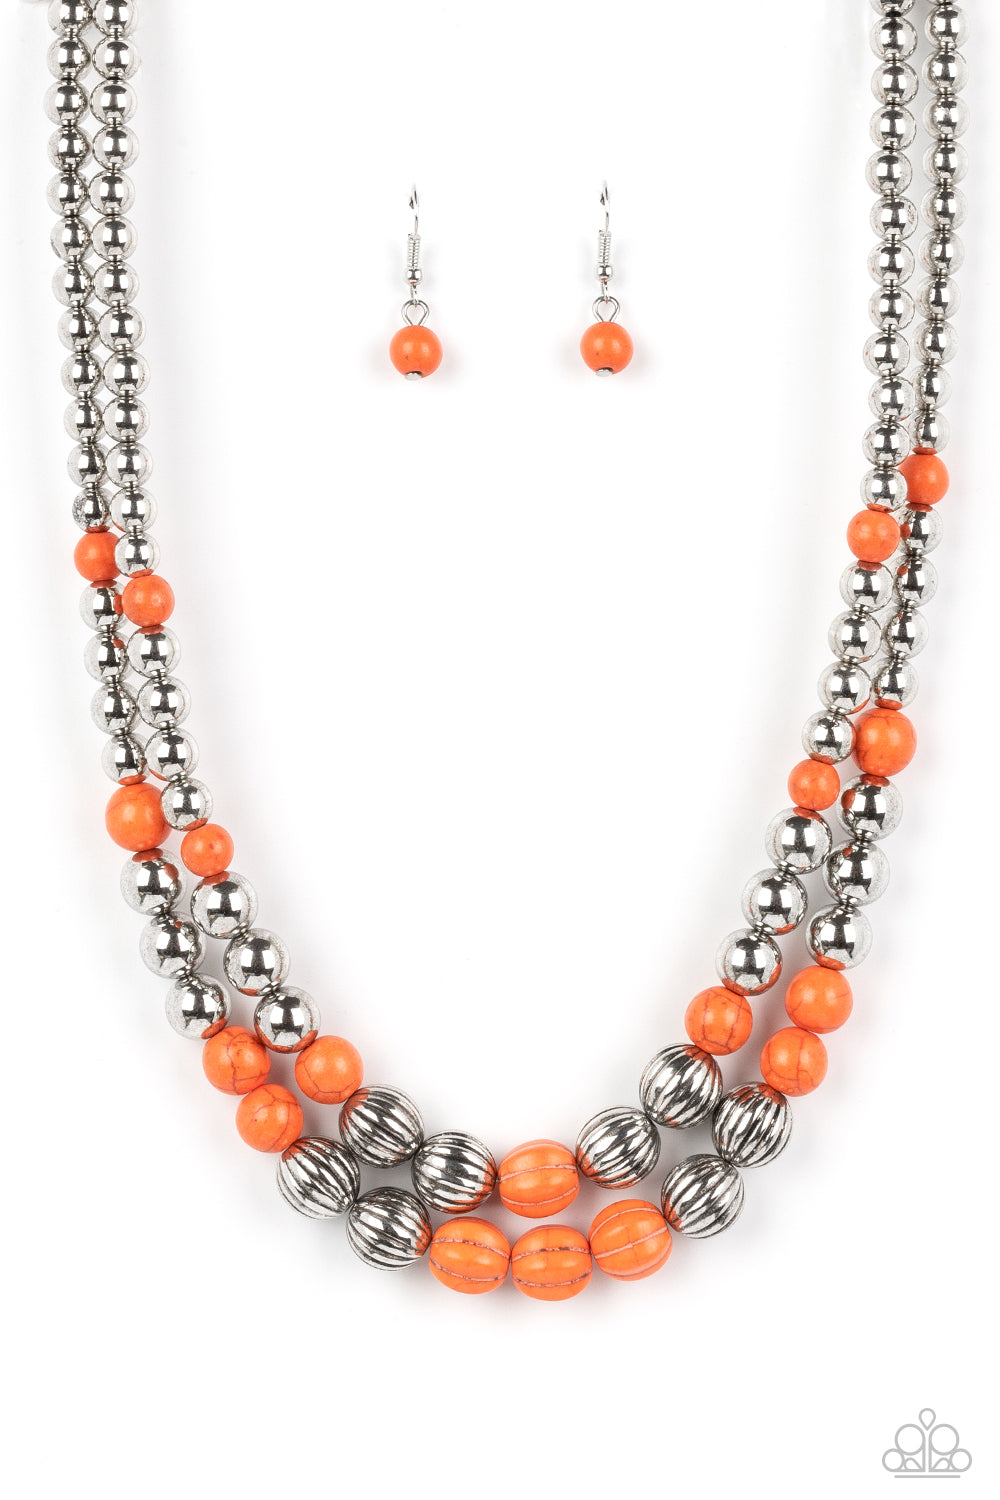 COUNTRY ROAD TRIP ORANGE-NECKLACE